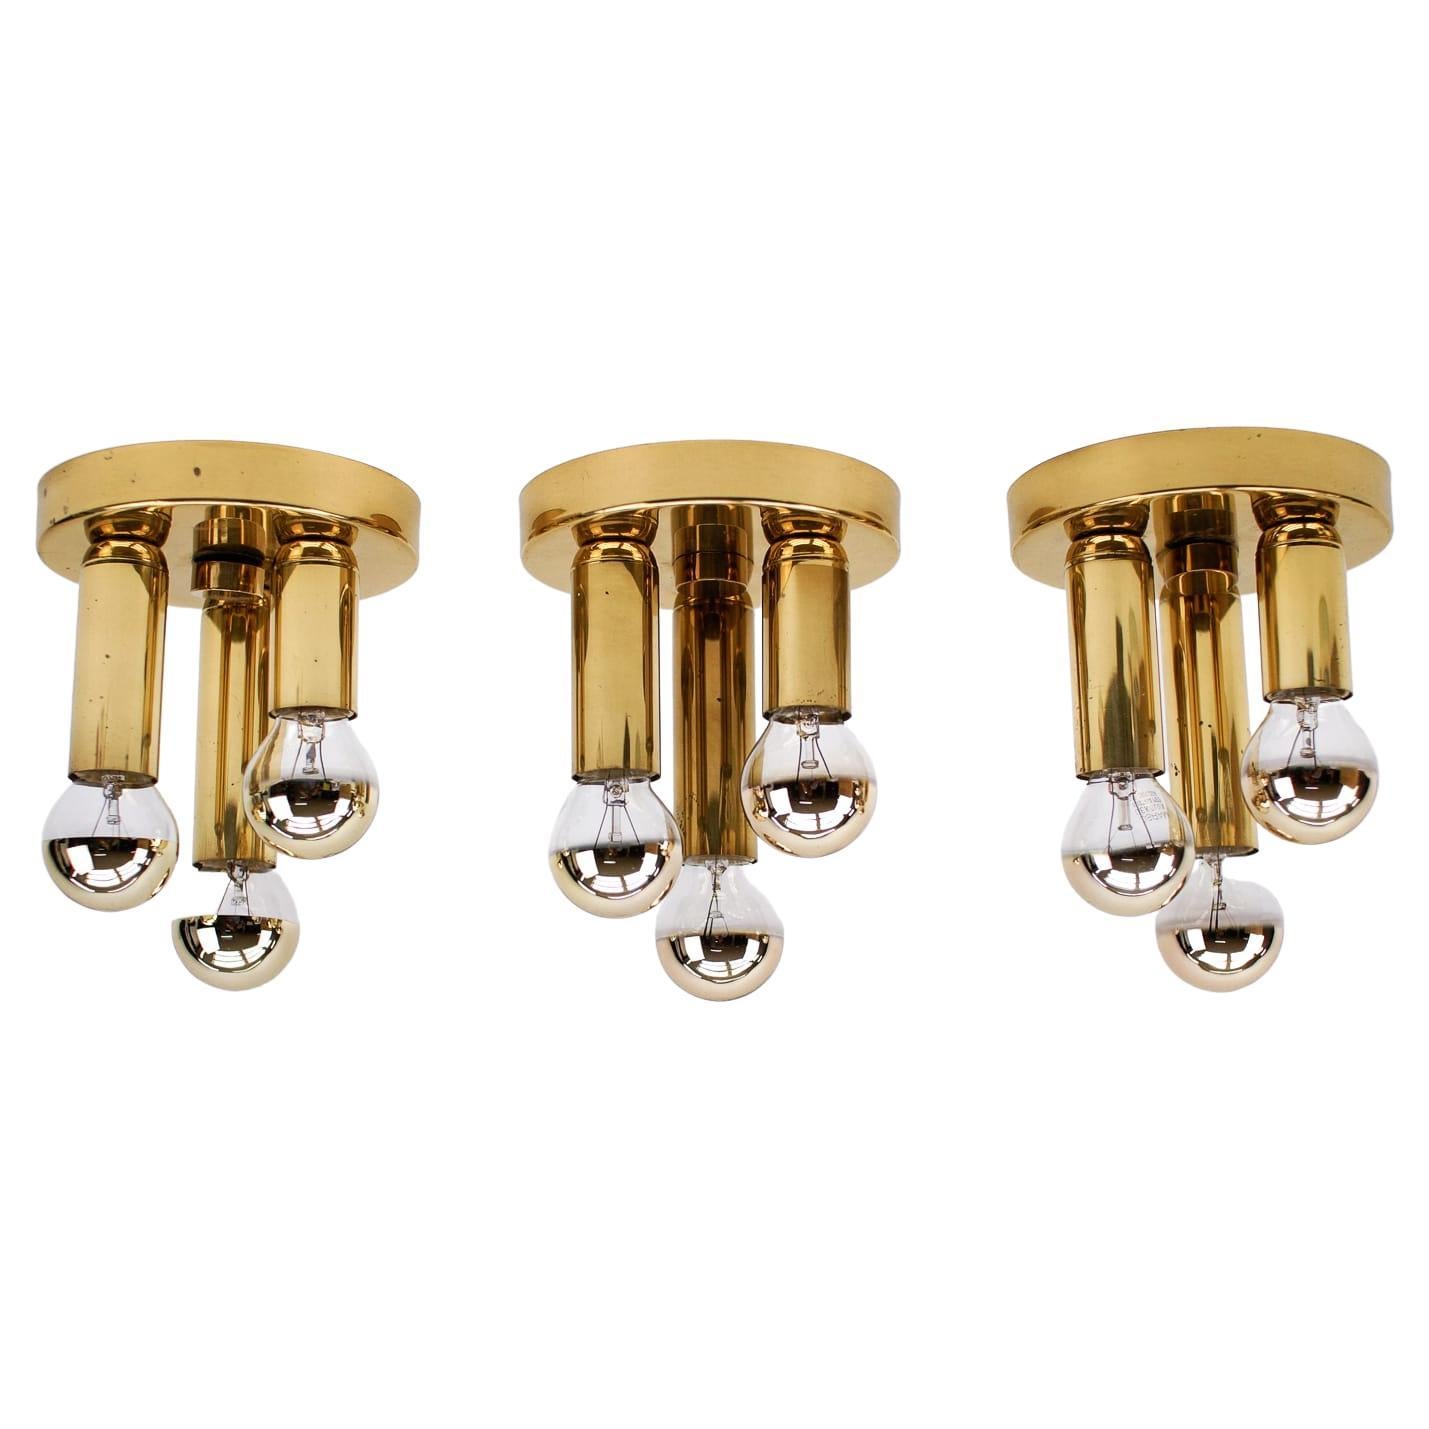 Set of 3 Small Elegant Ceiling Lamps with Three Lights, 1970s, Germany